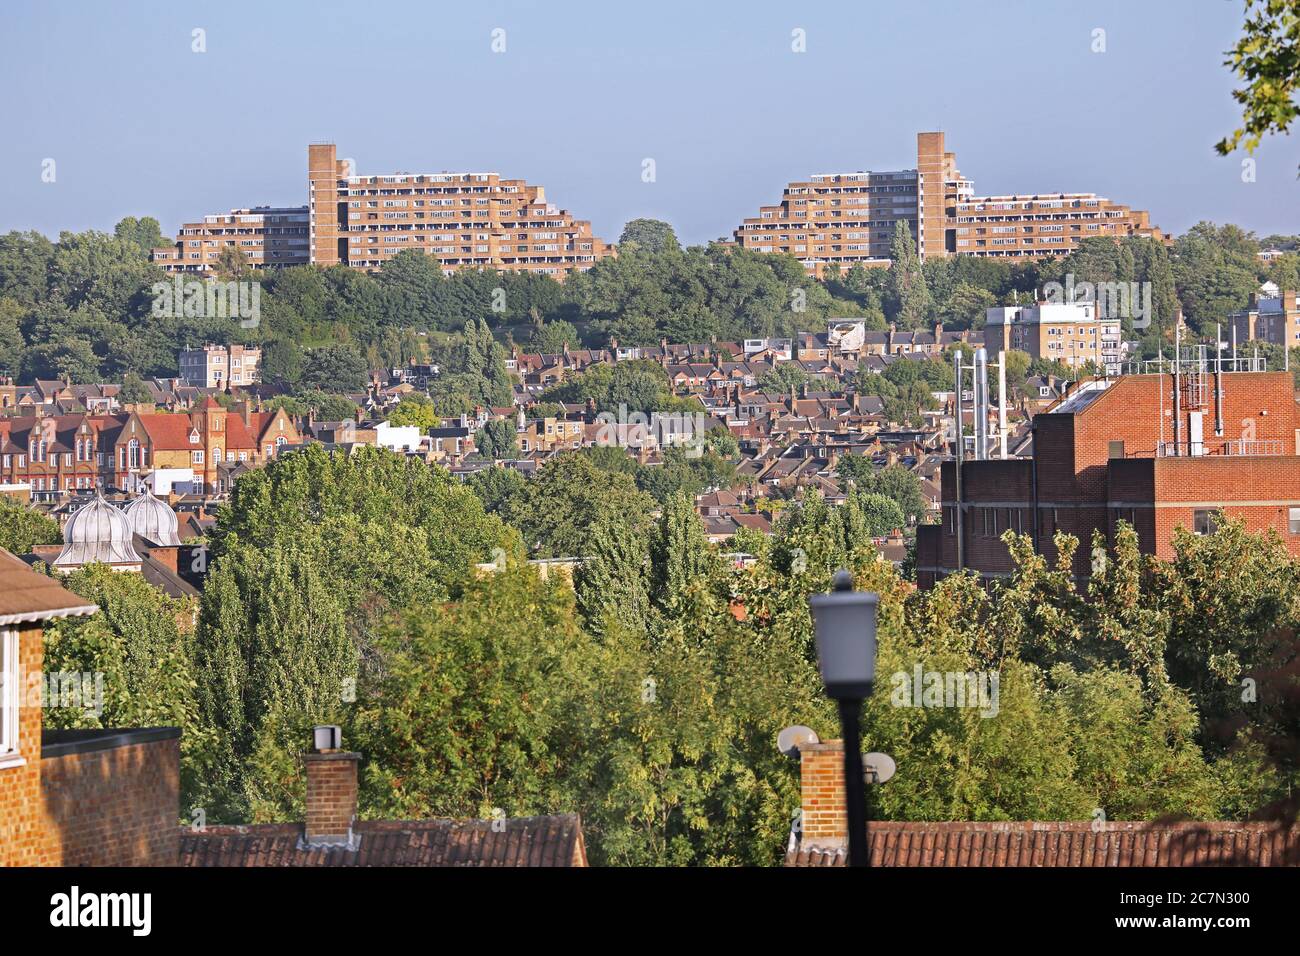 Dawson's Heights, the famous 1960s public housing project in South London, designed by Kate Macintosh. North elevations, viewed from Denmark Hill. Stock Photo